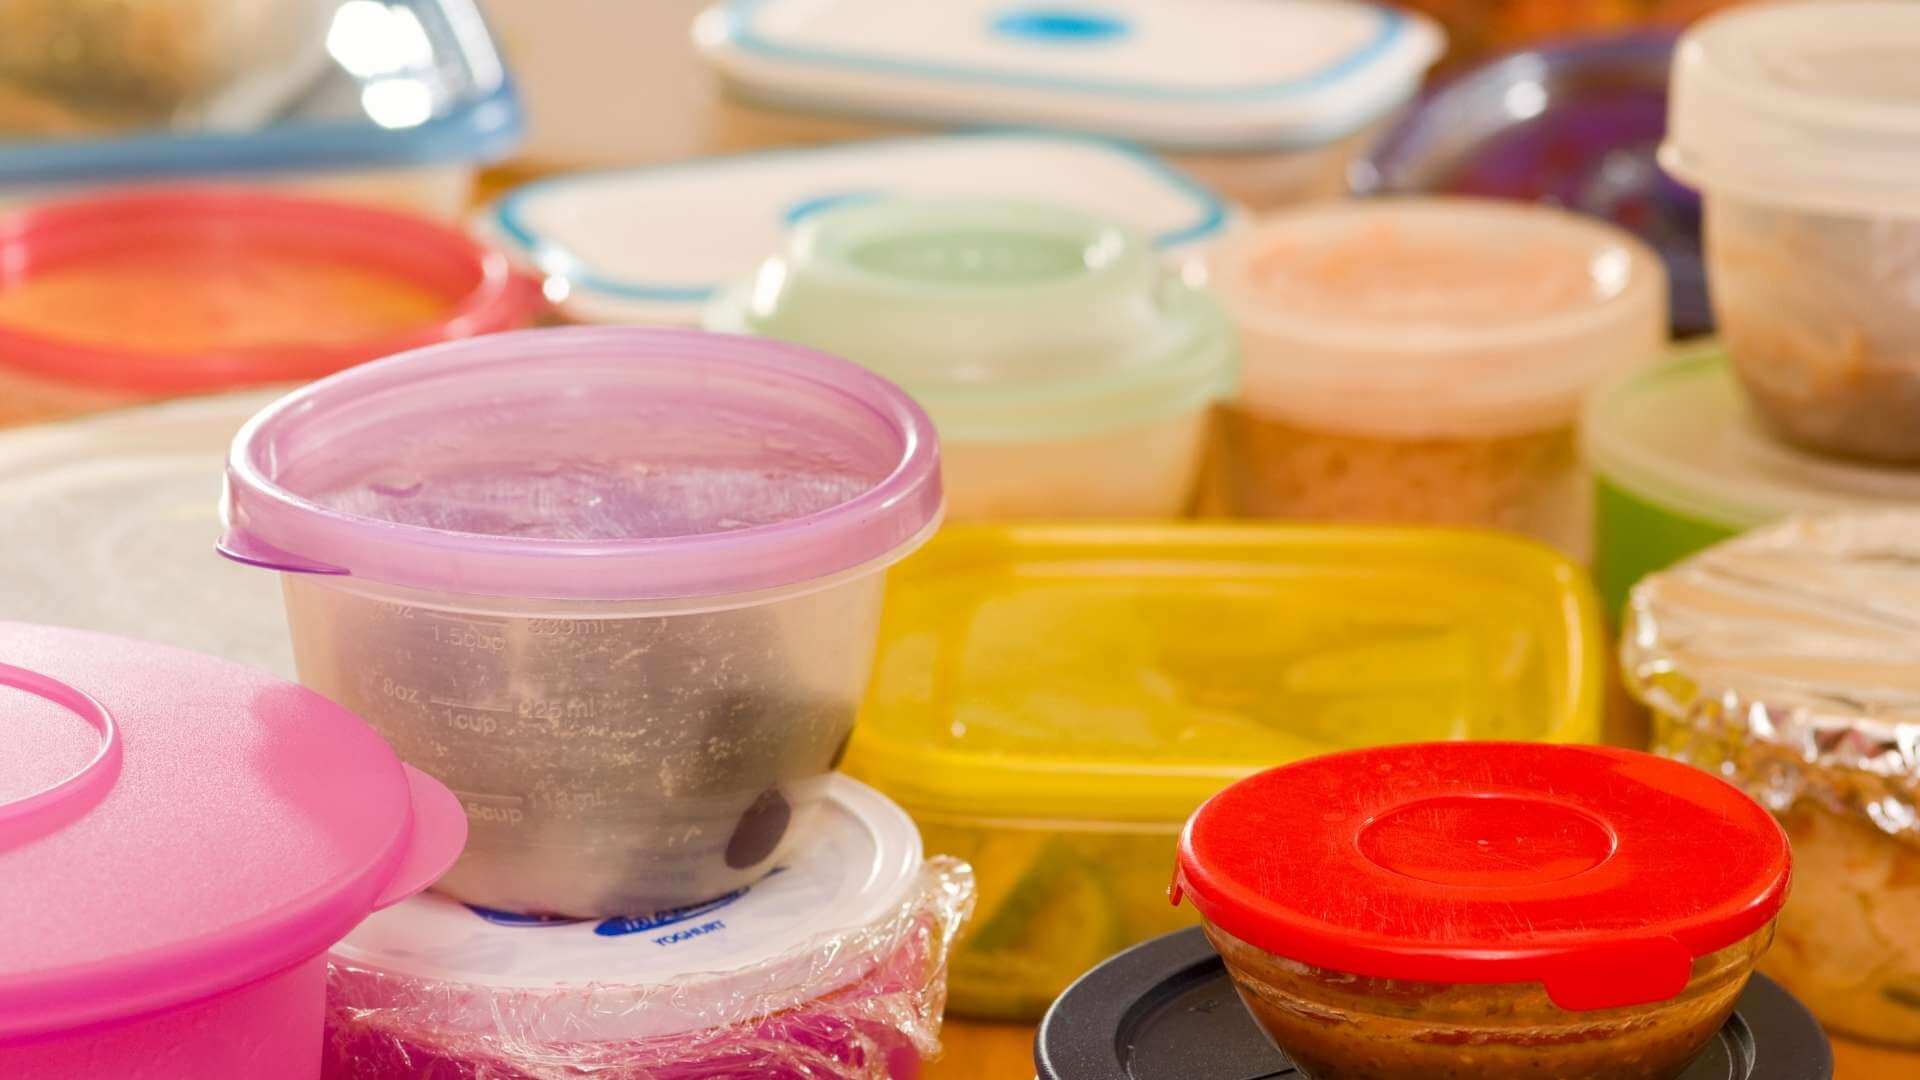 https://www.implasticfree.com/wp-content/uploads/2022/10/Is-it-Harmful-To-Store-Food-In-Plastic-Containers.jpg